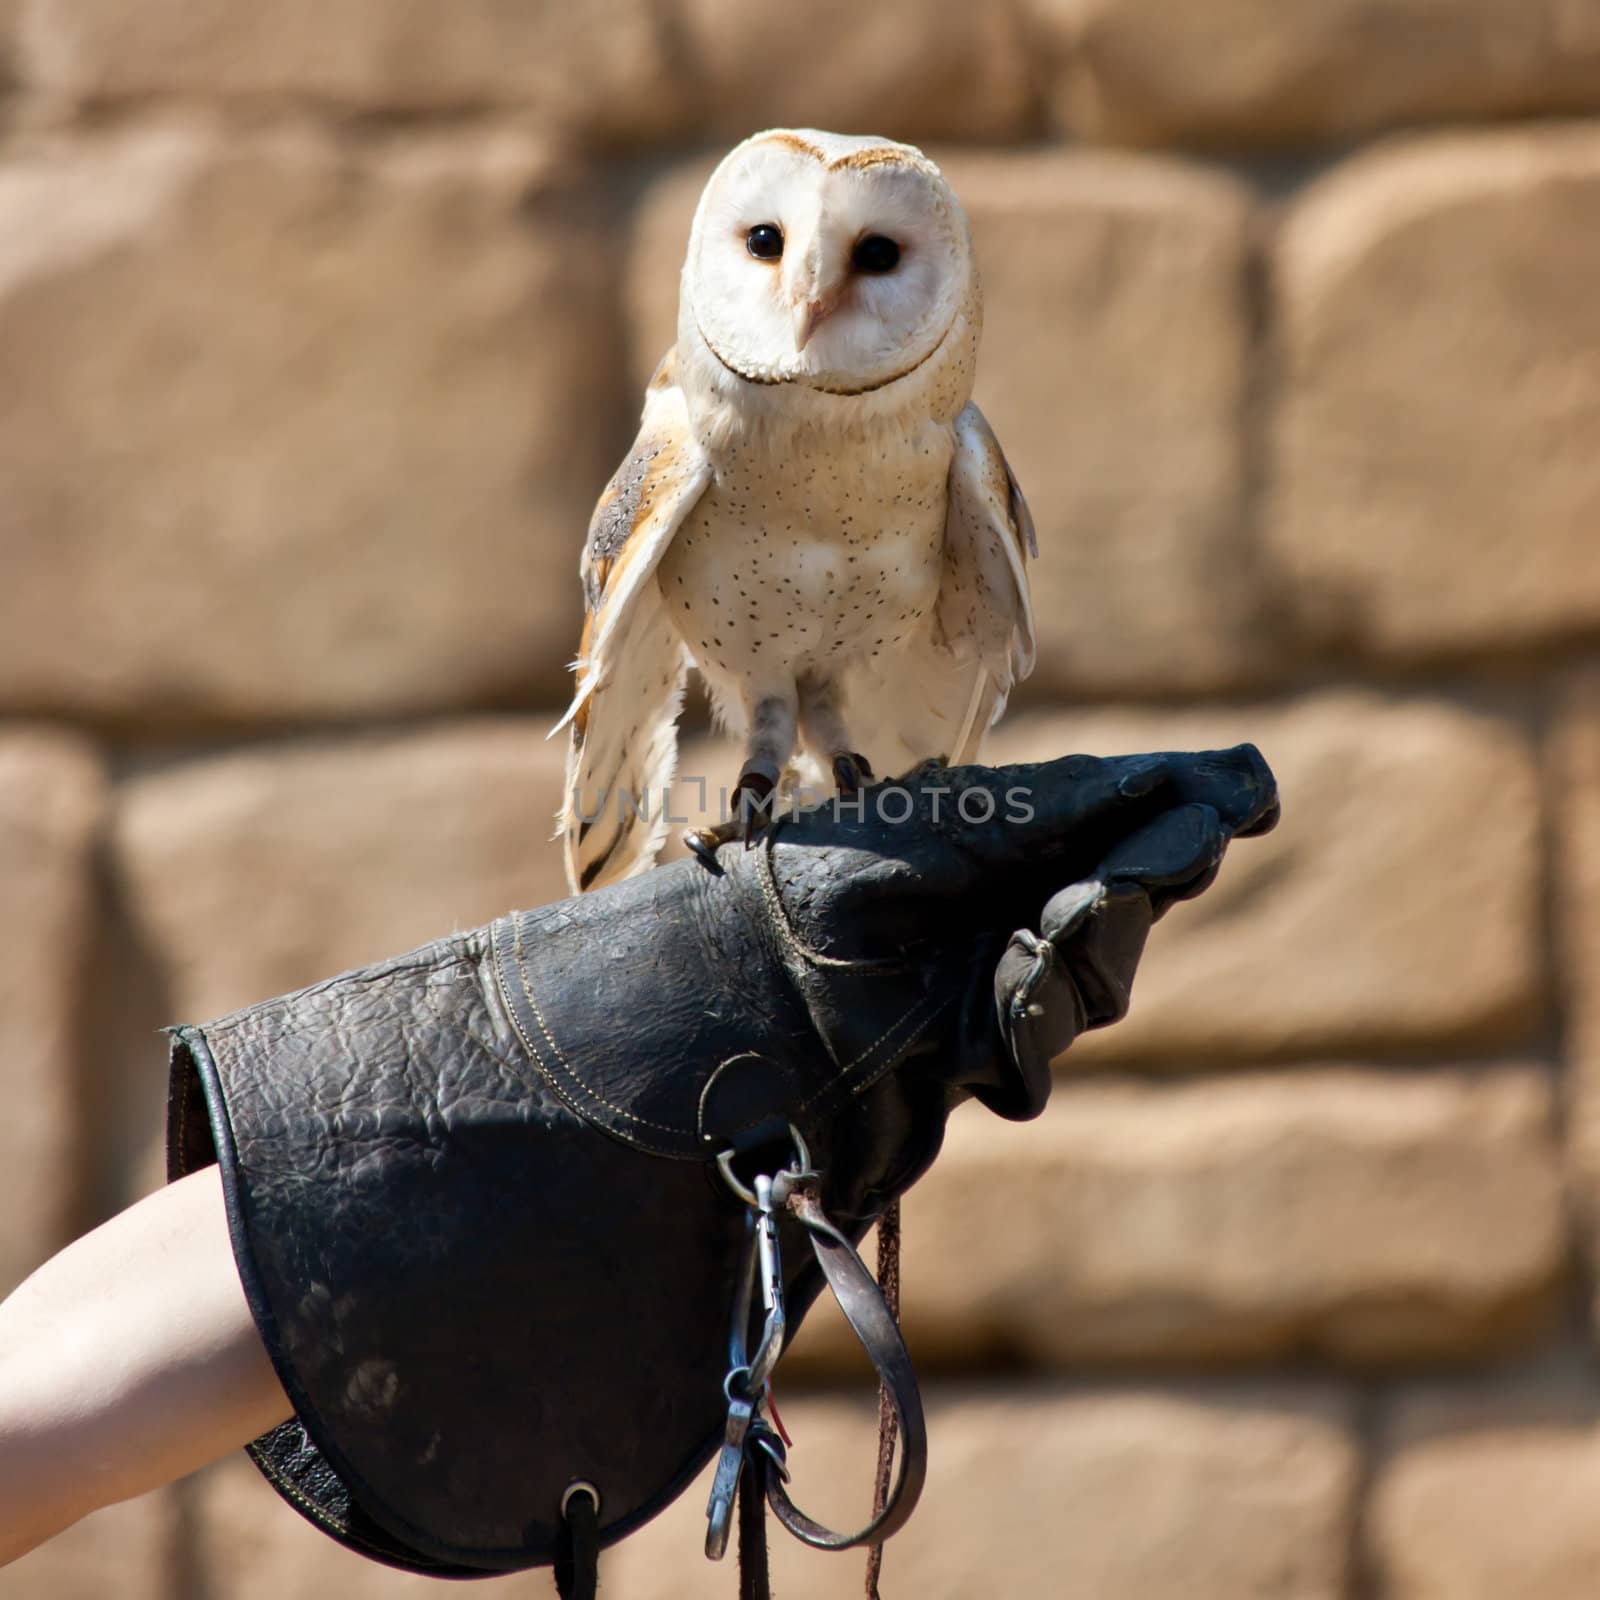 The Barn Owl (Tyto alba) is the most widely distributed species of owl, and one of the most widespread of all birds. It is also referred to as Common Barn Owl, to distinguish it from other species in the barn-owl family Tytonidae.